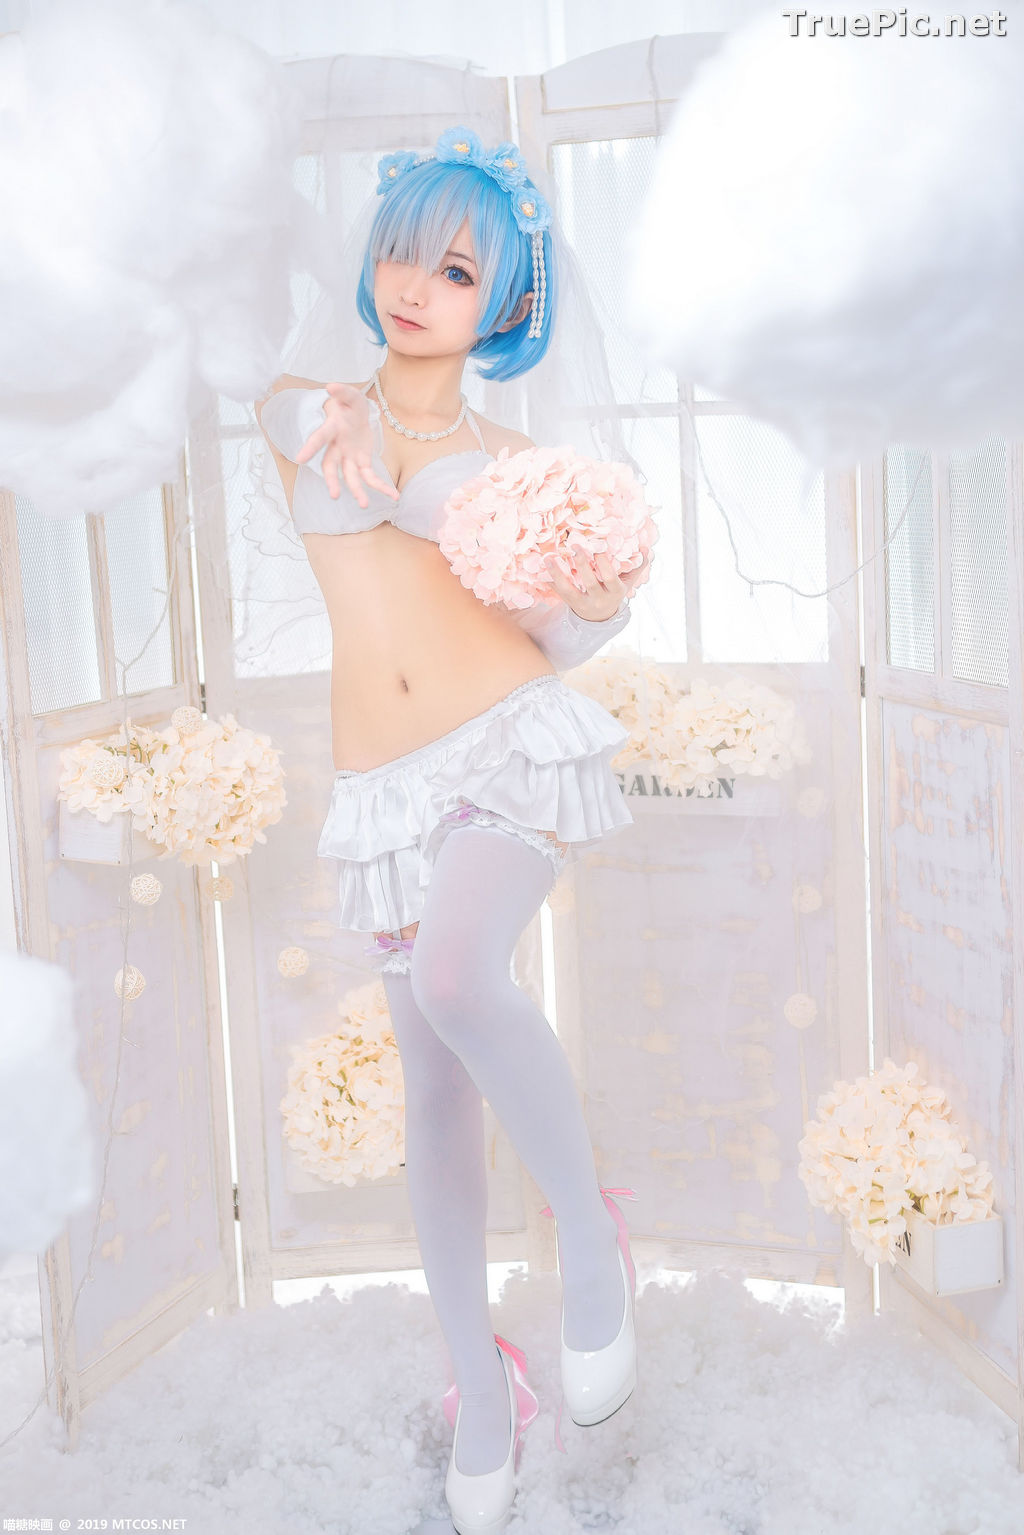 Image [MTCos] 喵糖映画 Vol.029 – Chinese Cute Model – Bride Rem Cosplay - TruePic.net - Picture-9